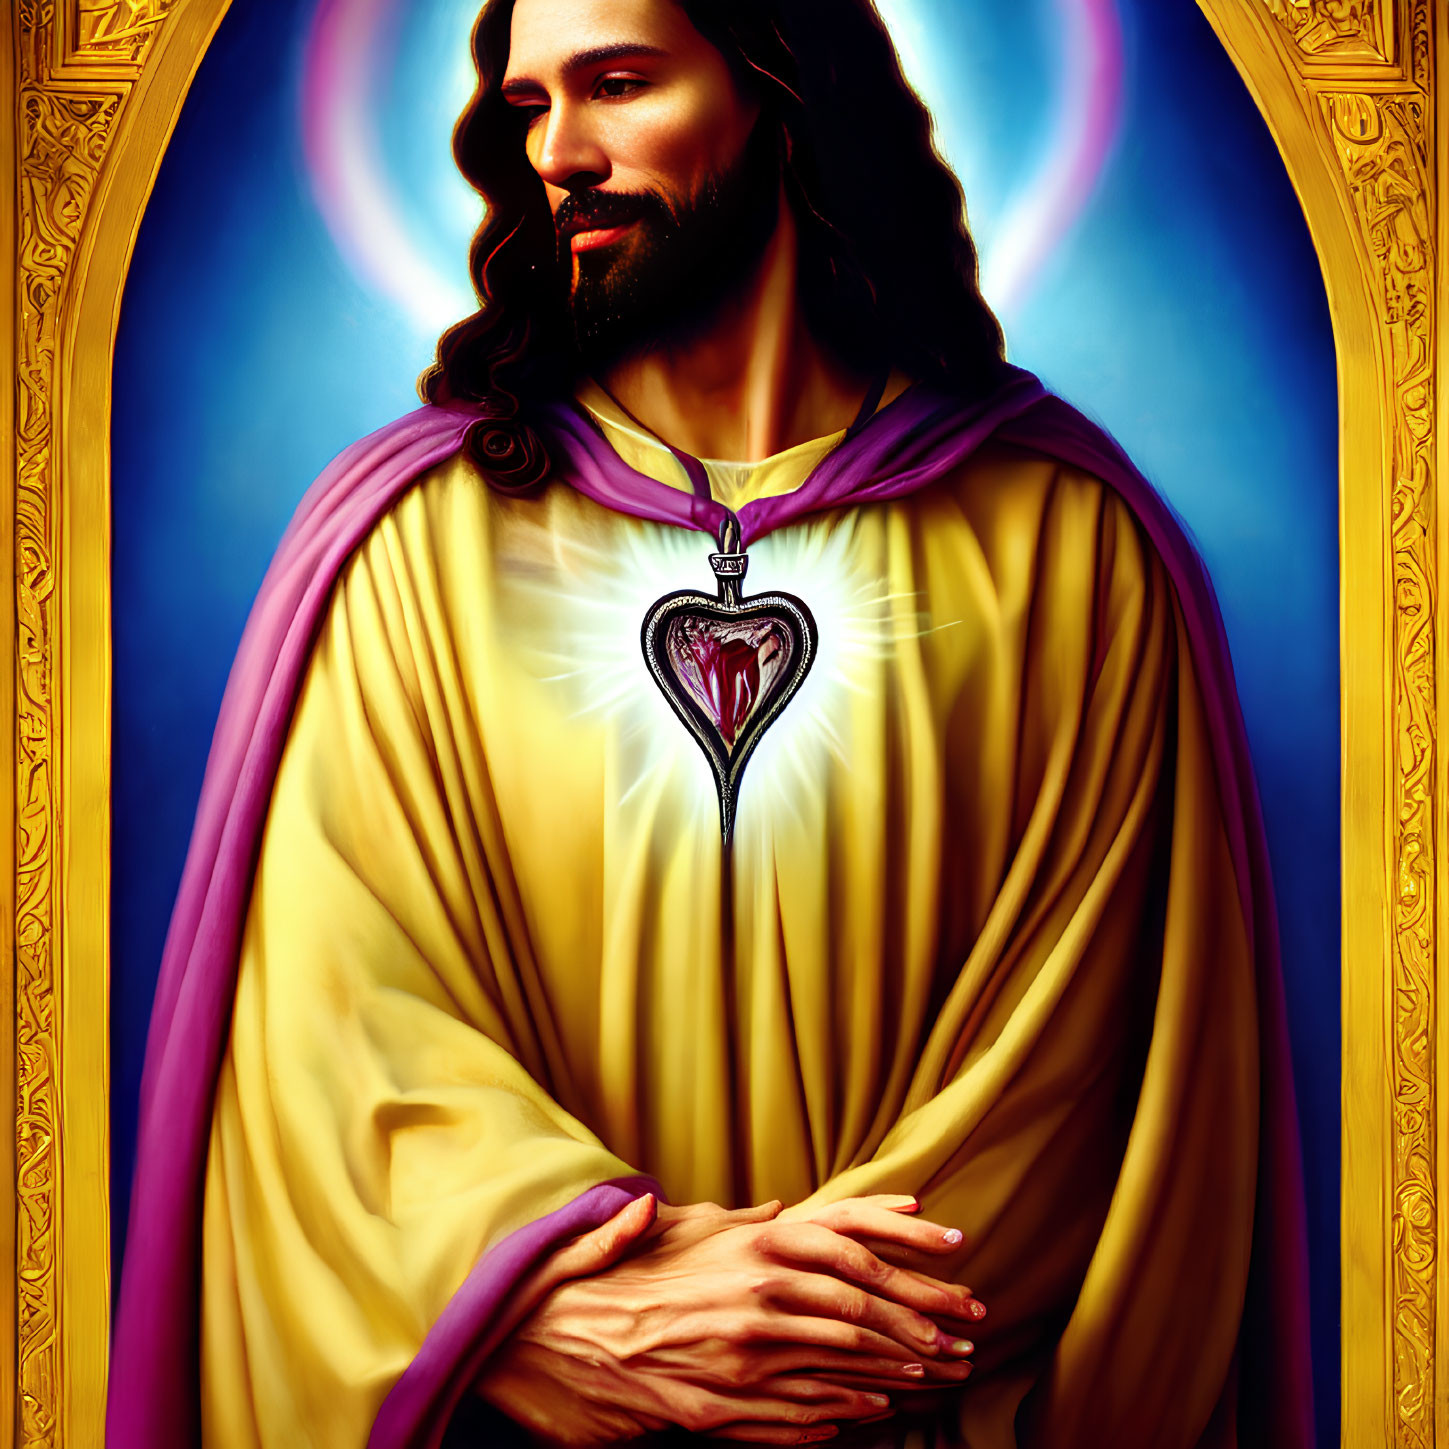 Vibrant religious illustration with heart symbol, yellow and purple robes on figure, set against blue orn